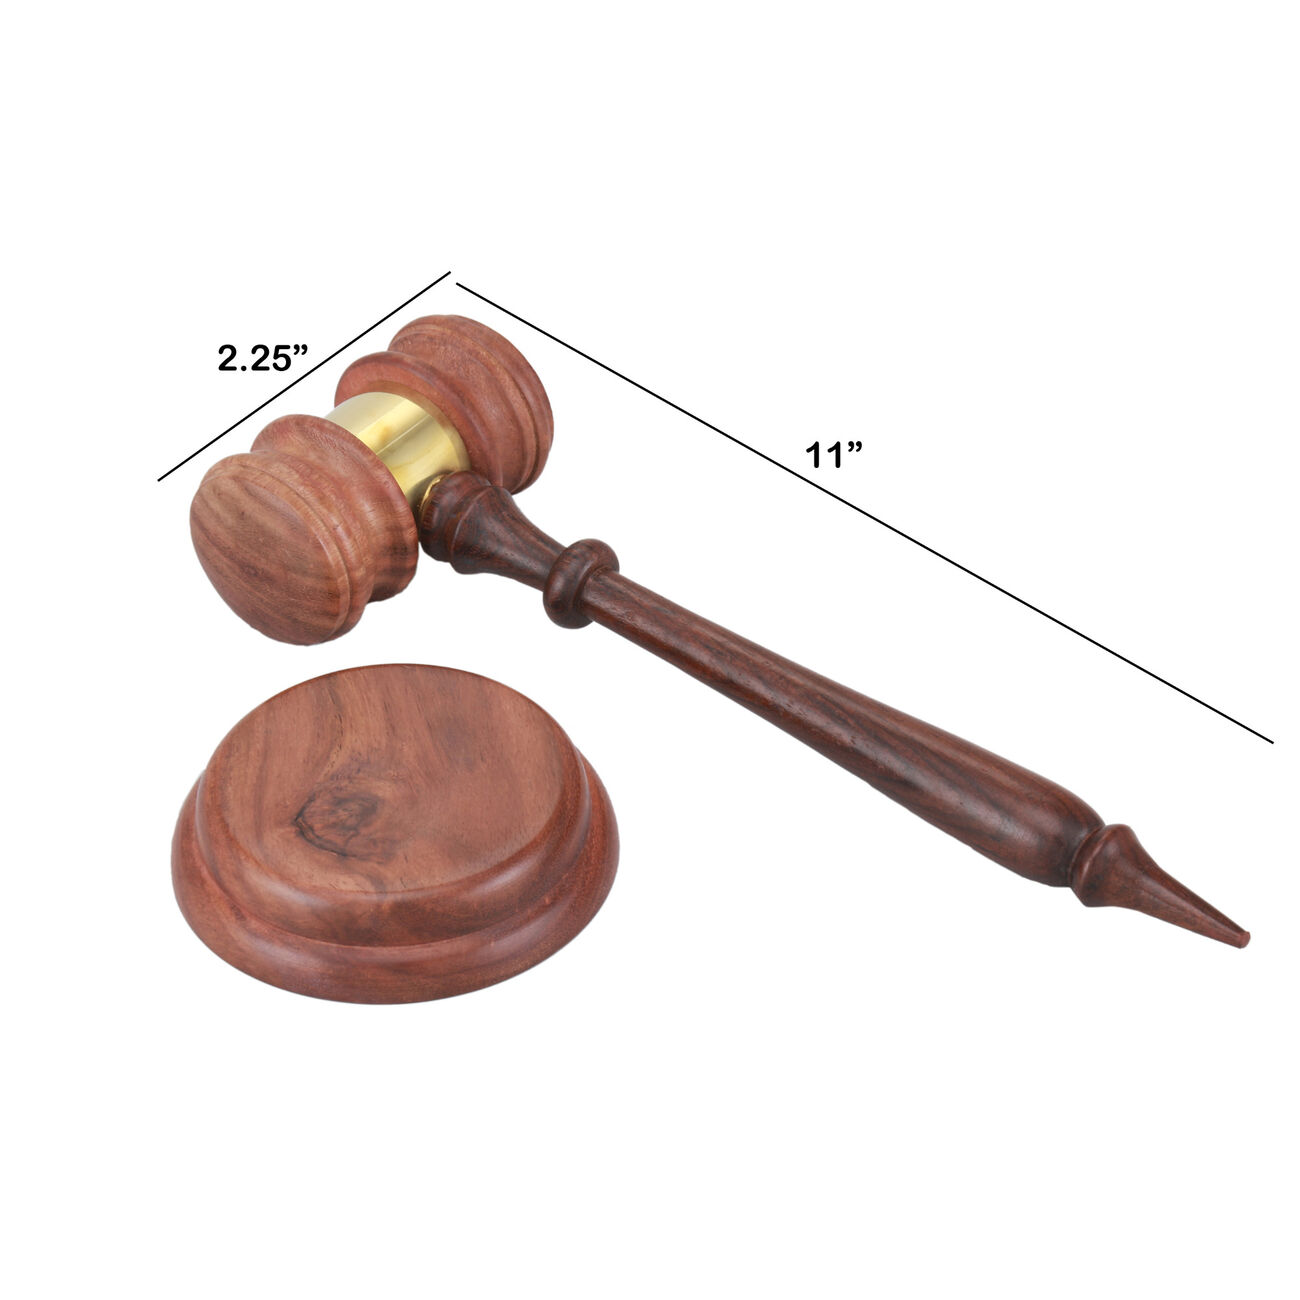 Wooden Gavel And Round Block Set With Brass Work, Natural Brown